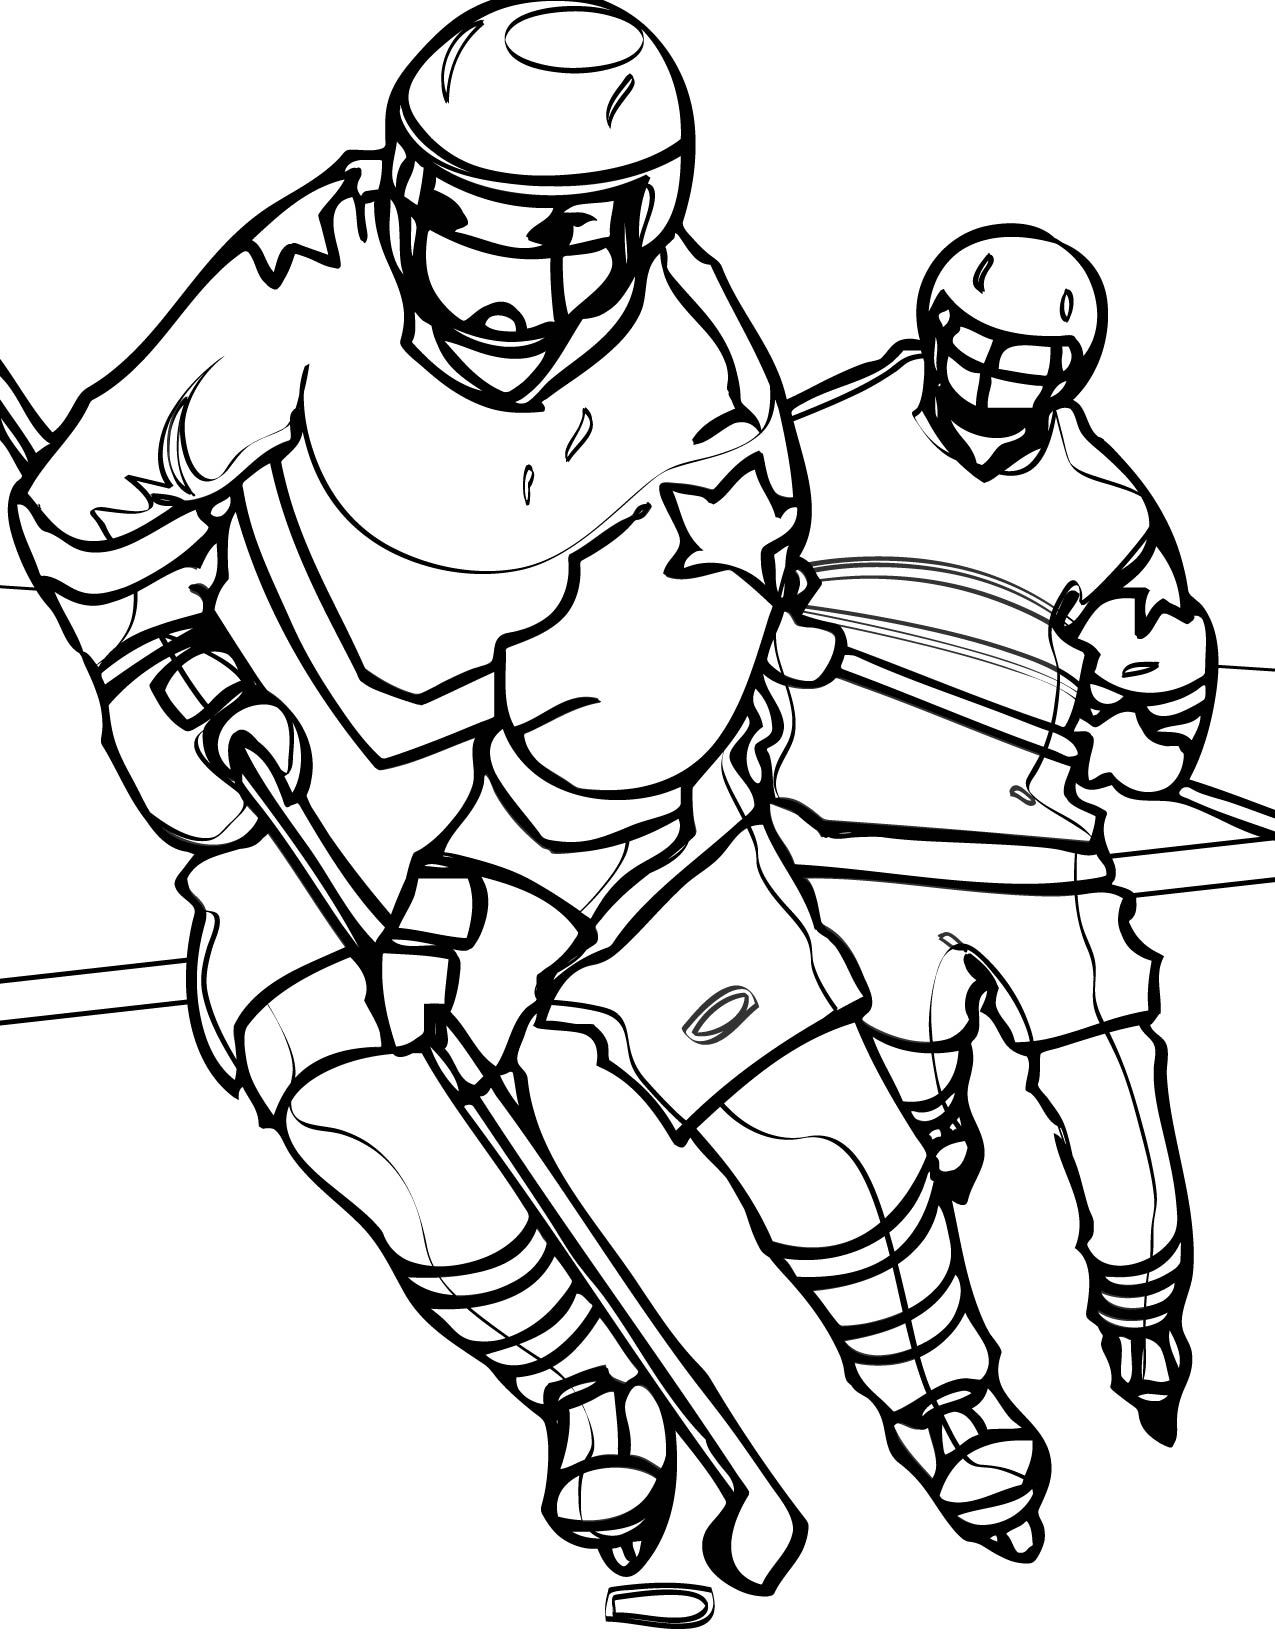 Coloring page winter sports